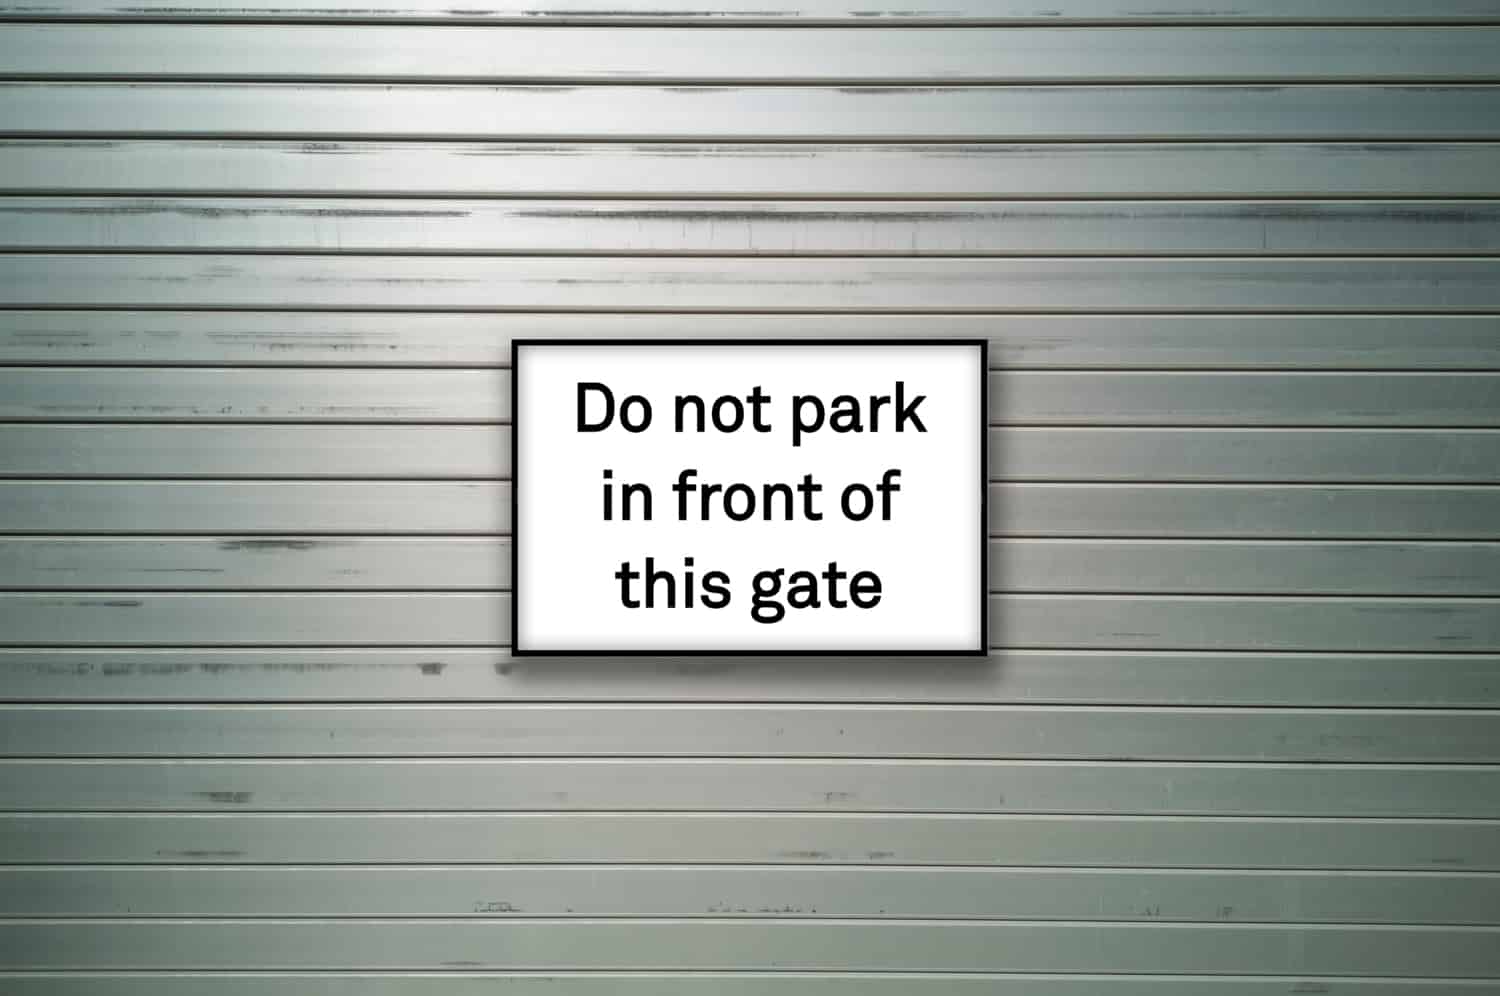 Gate signs